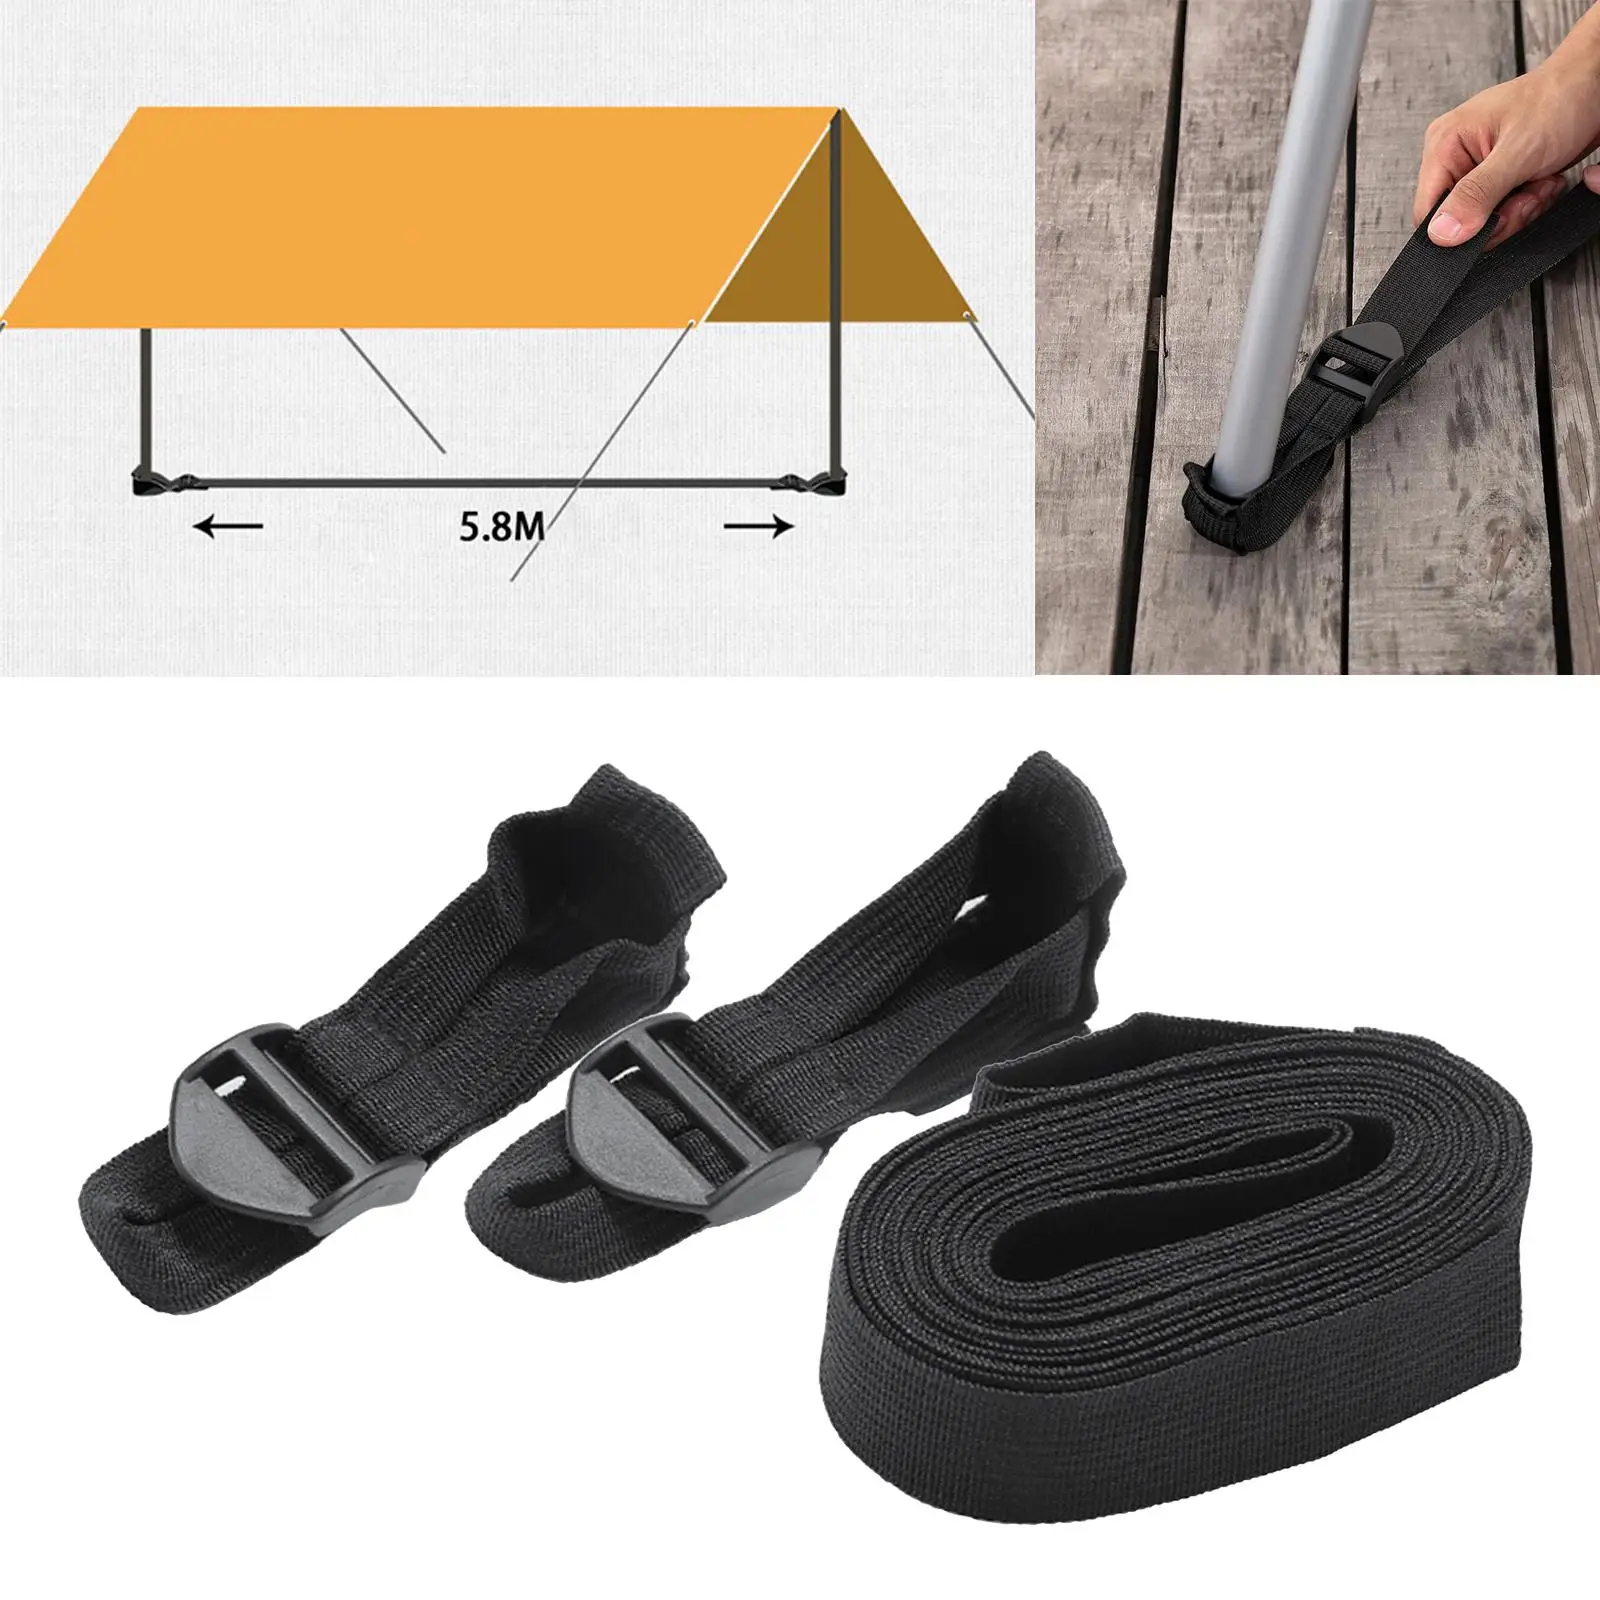 Awning Pole Fixed Resistant Fishing Camping Hiking Picnic Tent Canopy Windproof Rod Holder